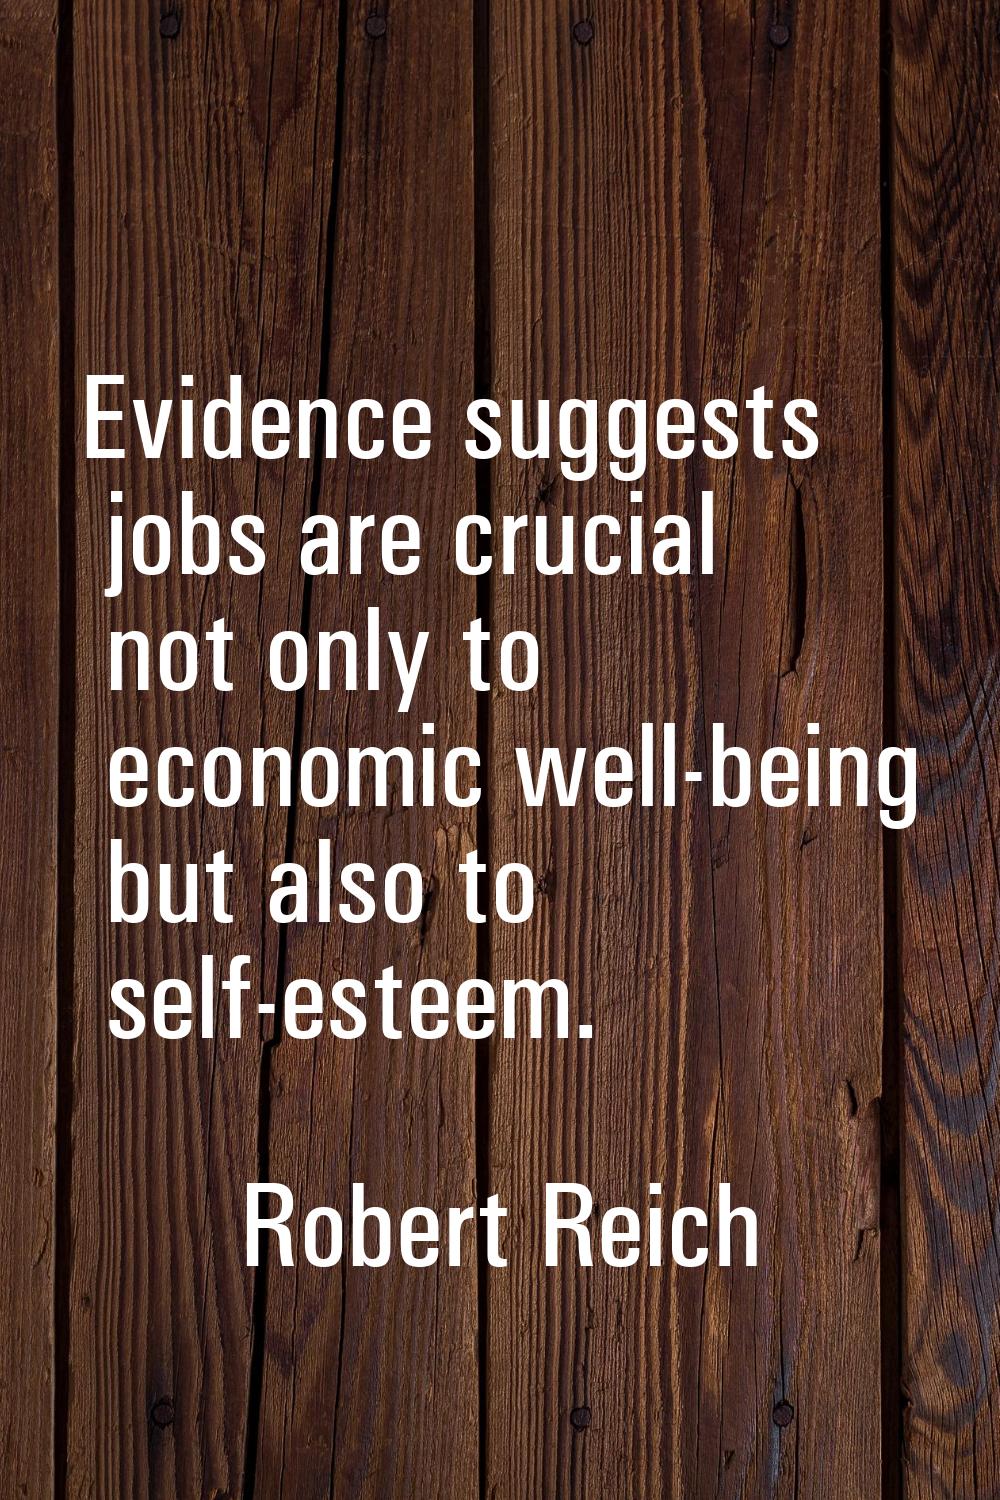 Evidence suggests jobs are crucial not only to economic well-being but also to self-esteem.